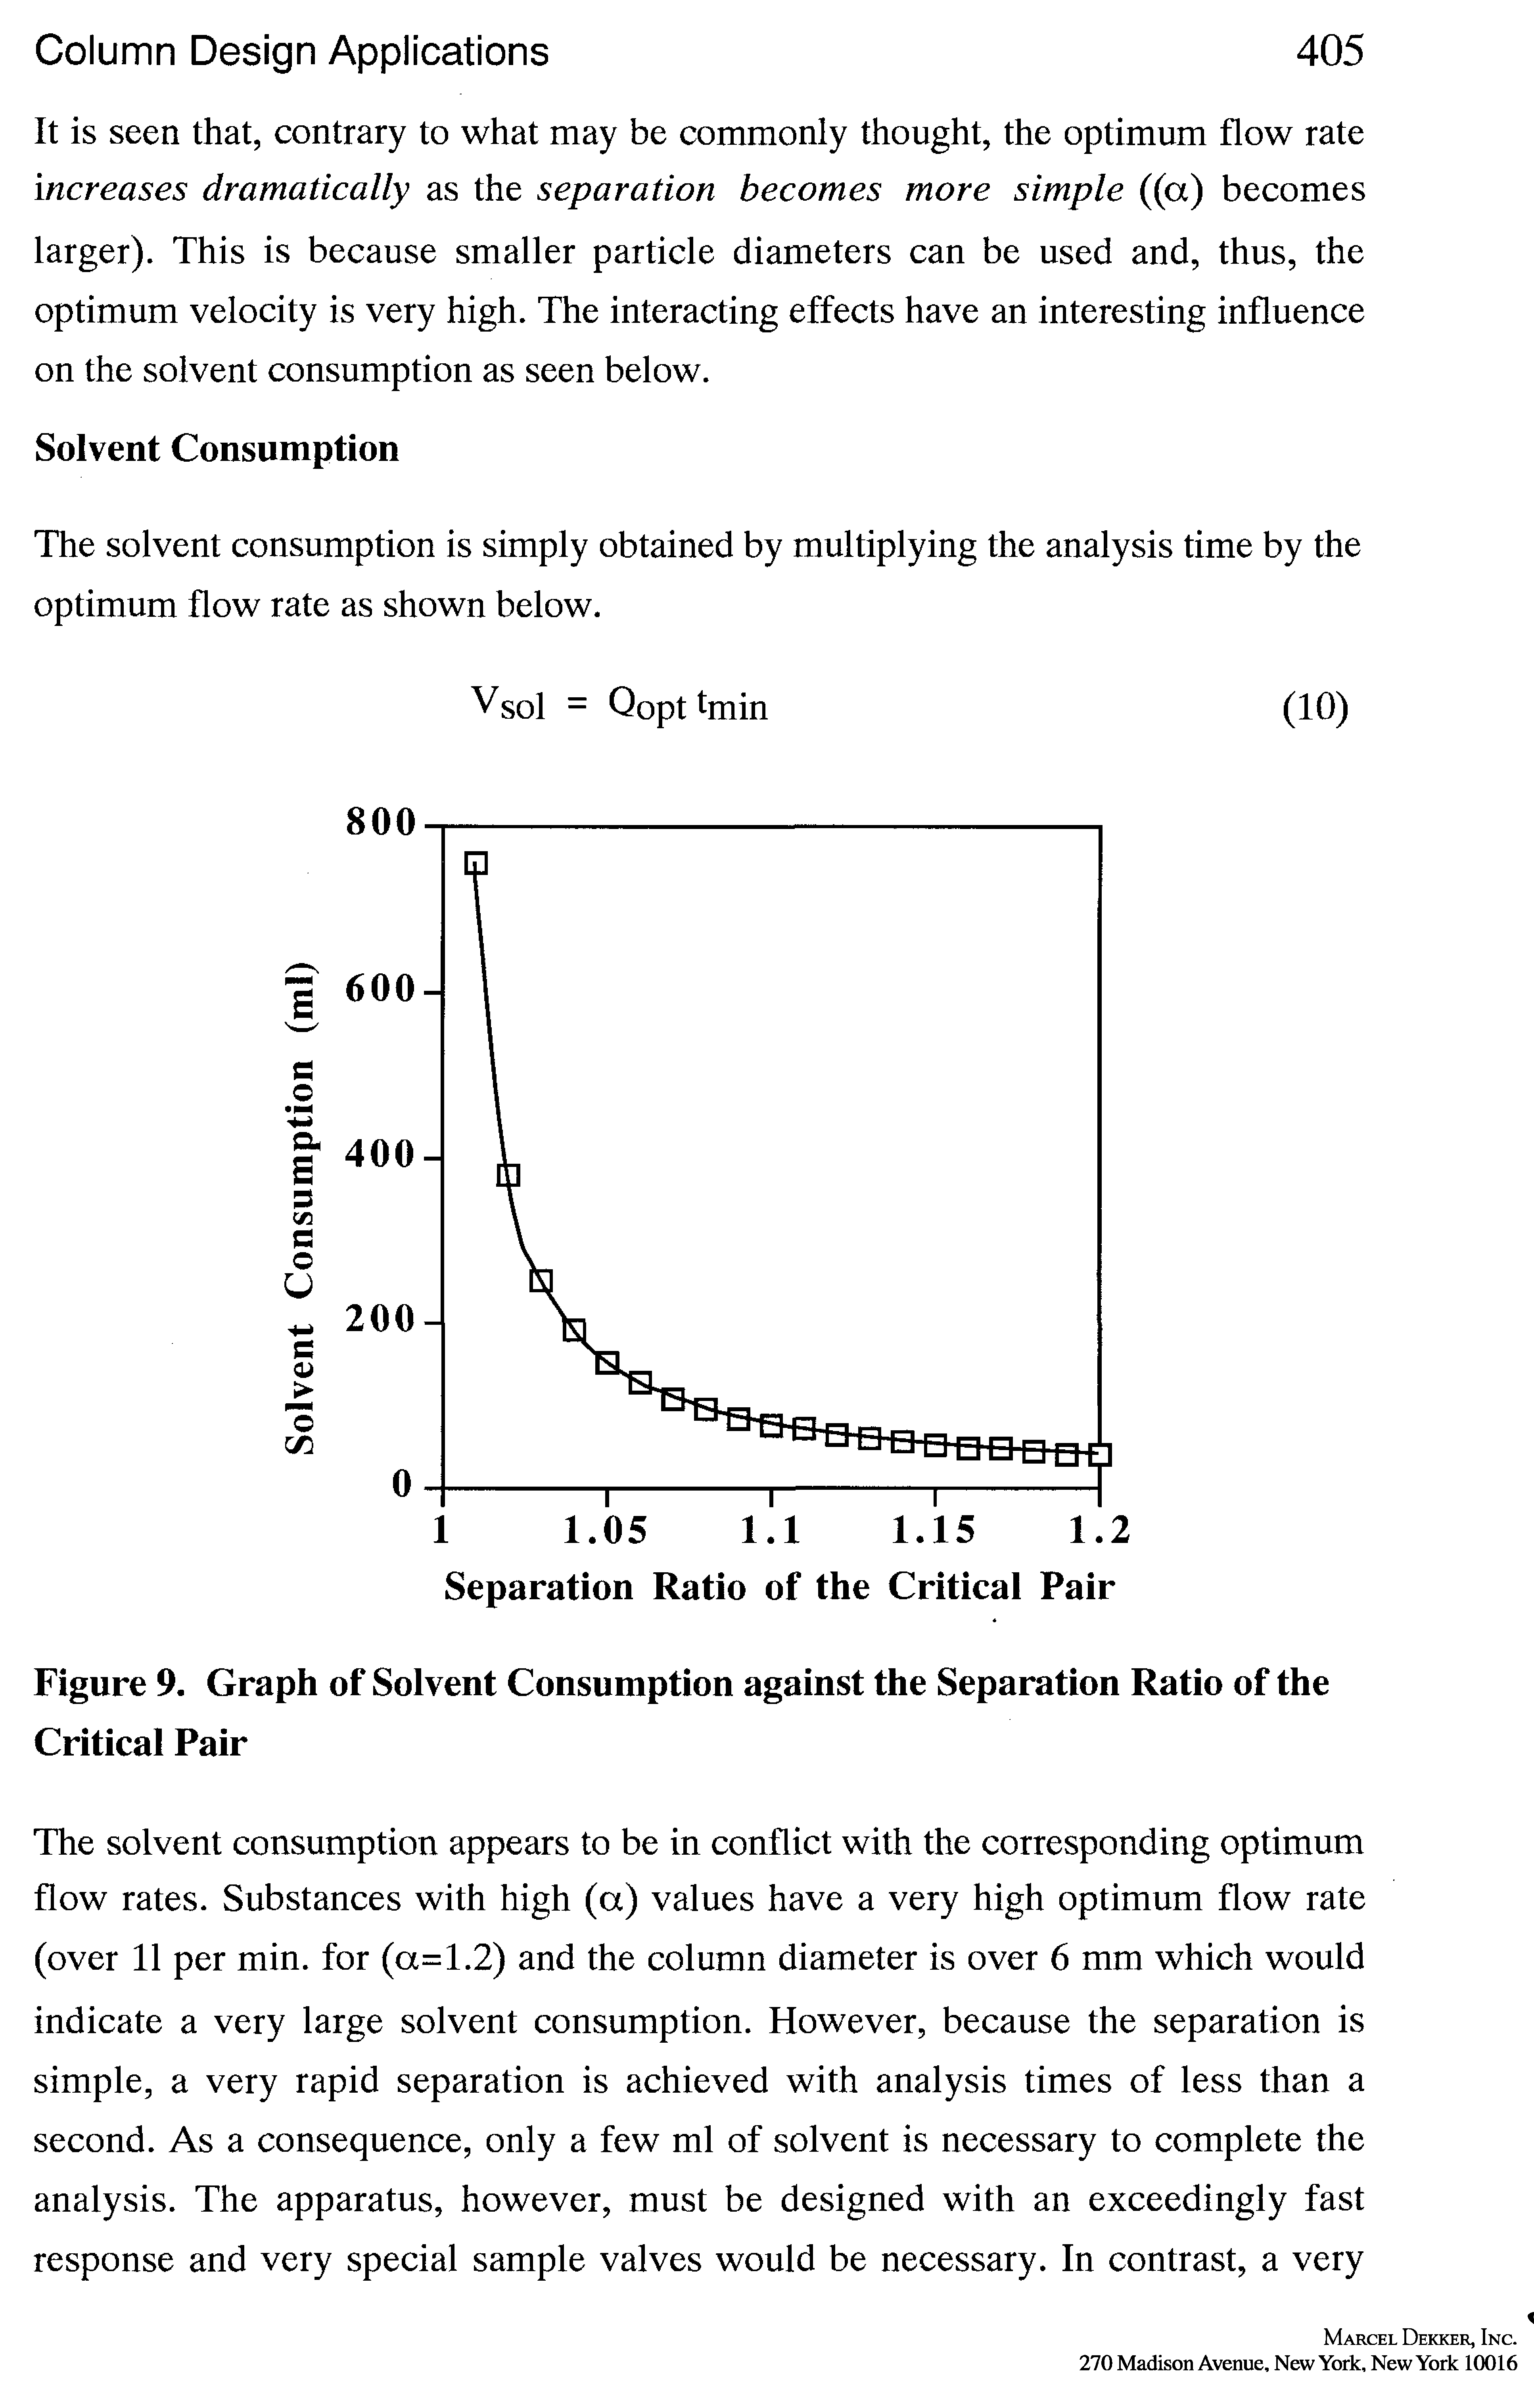 Figure 9. Graph of Solvent Consumption against the Separation Ratio of the Critical Pair...